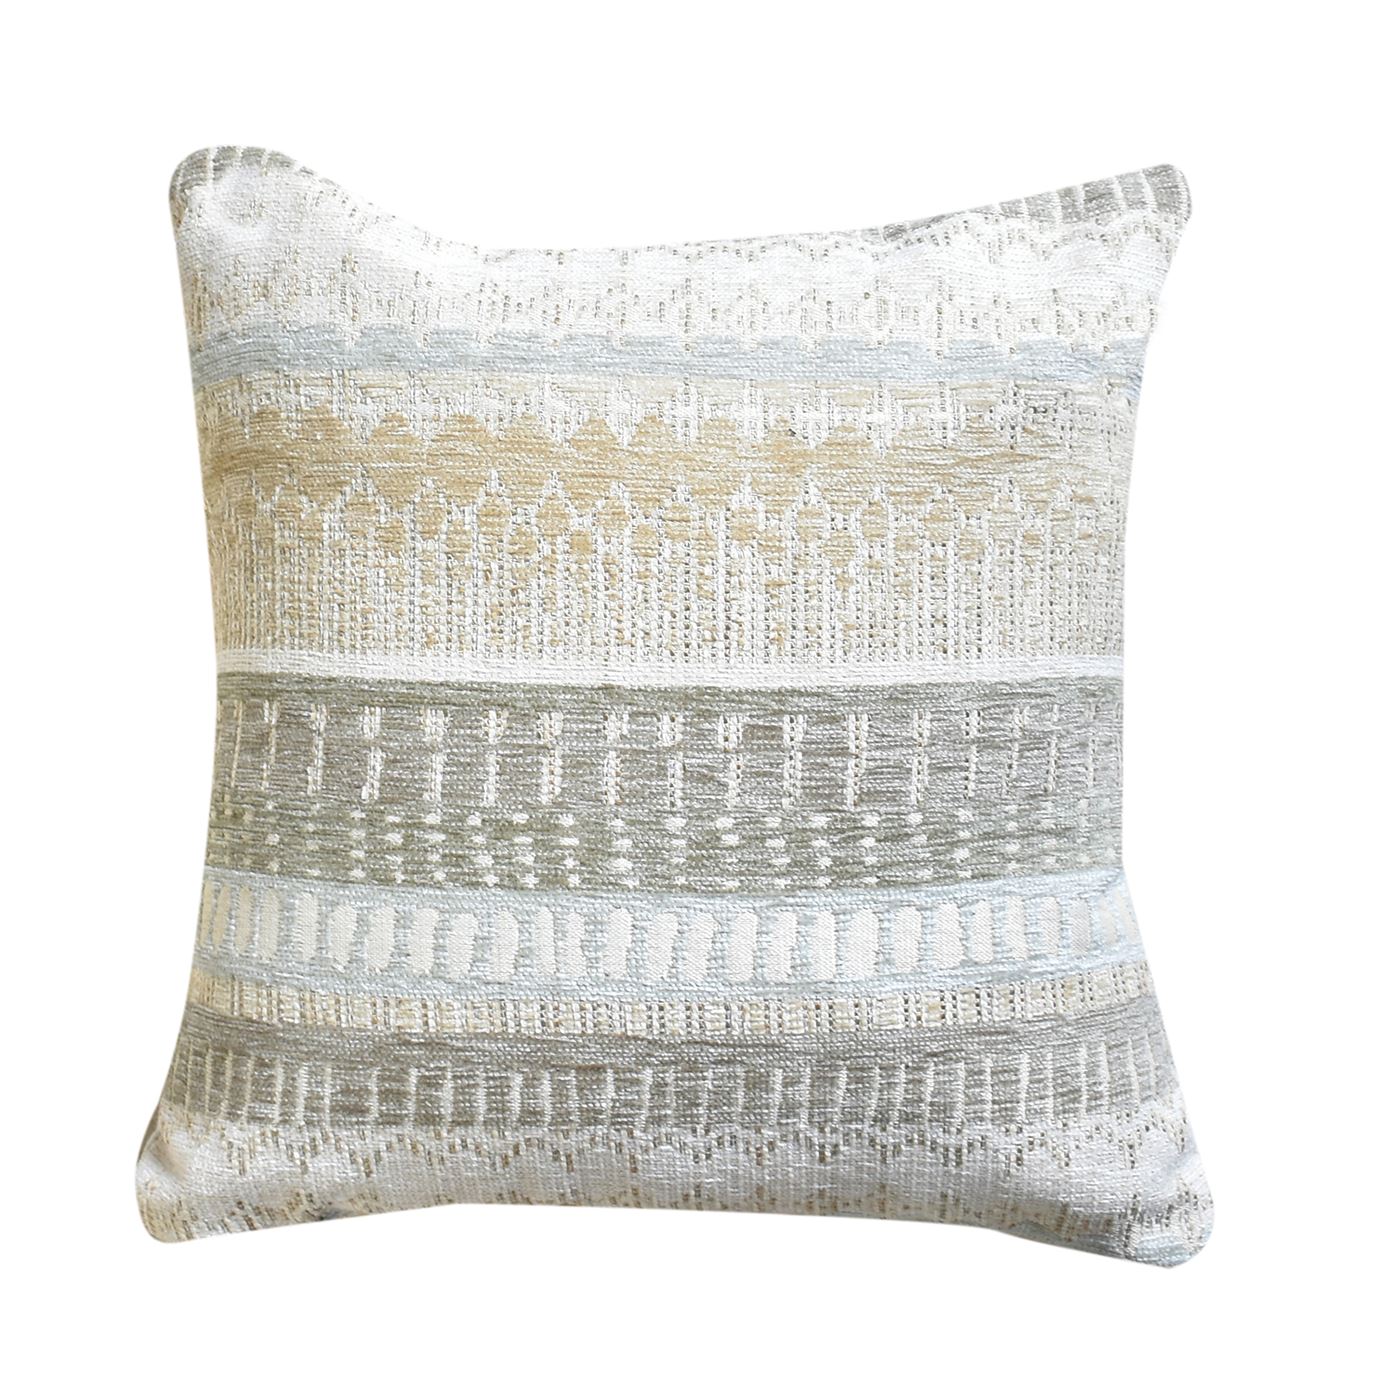 Albi Pillow, Acrylic, Polyester, Beige, Sage, Jaquard Durry, Flat Weave